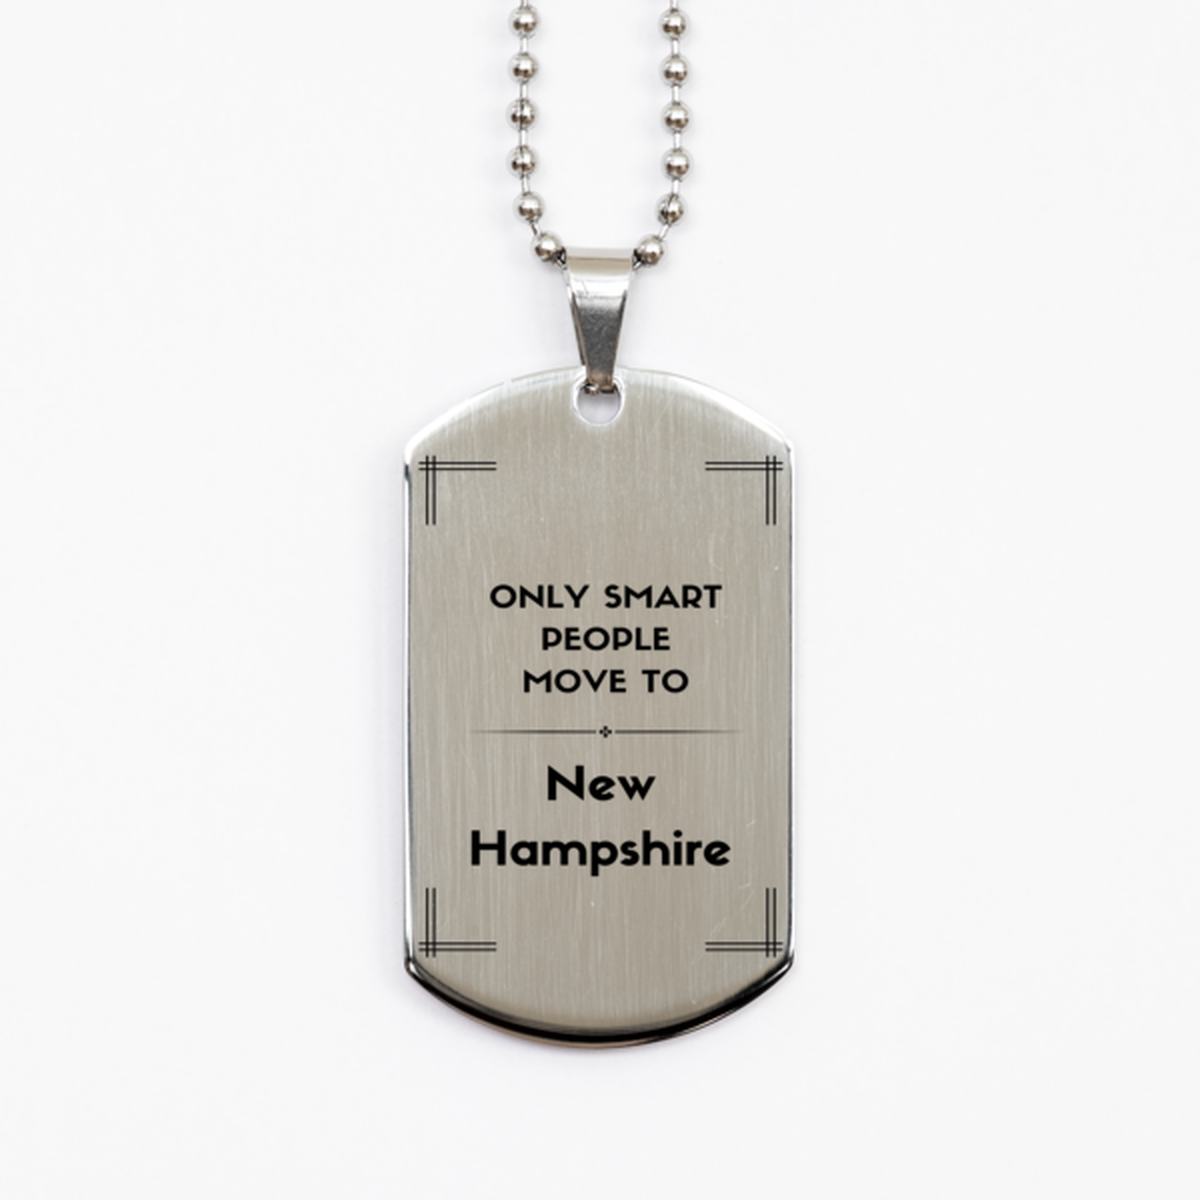 Only smart people move to New Hampshire Silver Dog Tag, Gag Gifts For New Hampshire, Move to New Hampshire Gifts for Friends Coworker Funny Saying Quote